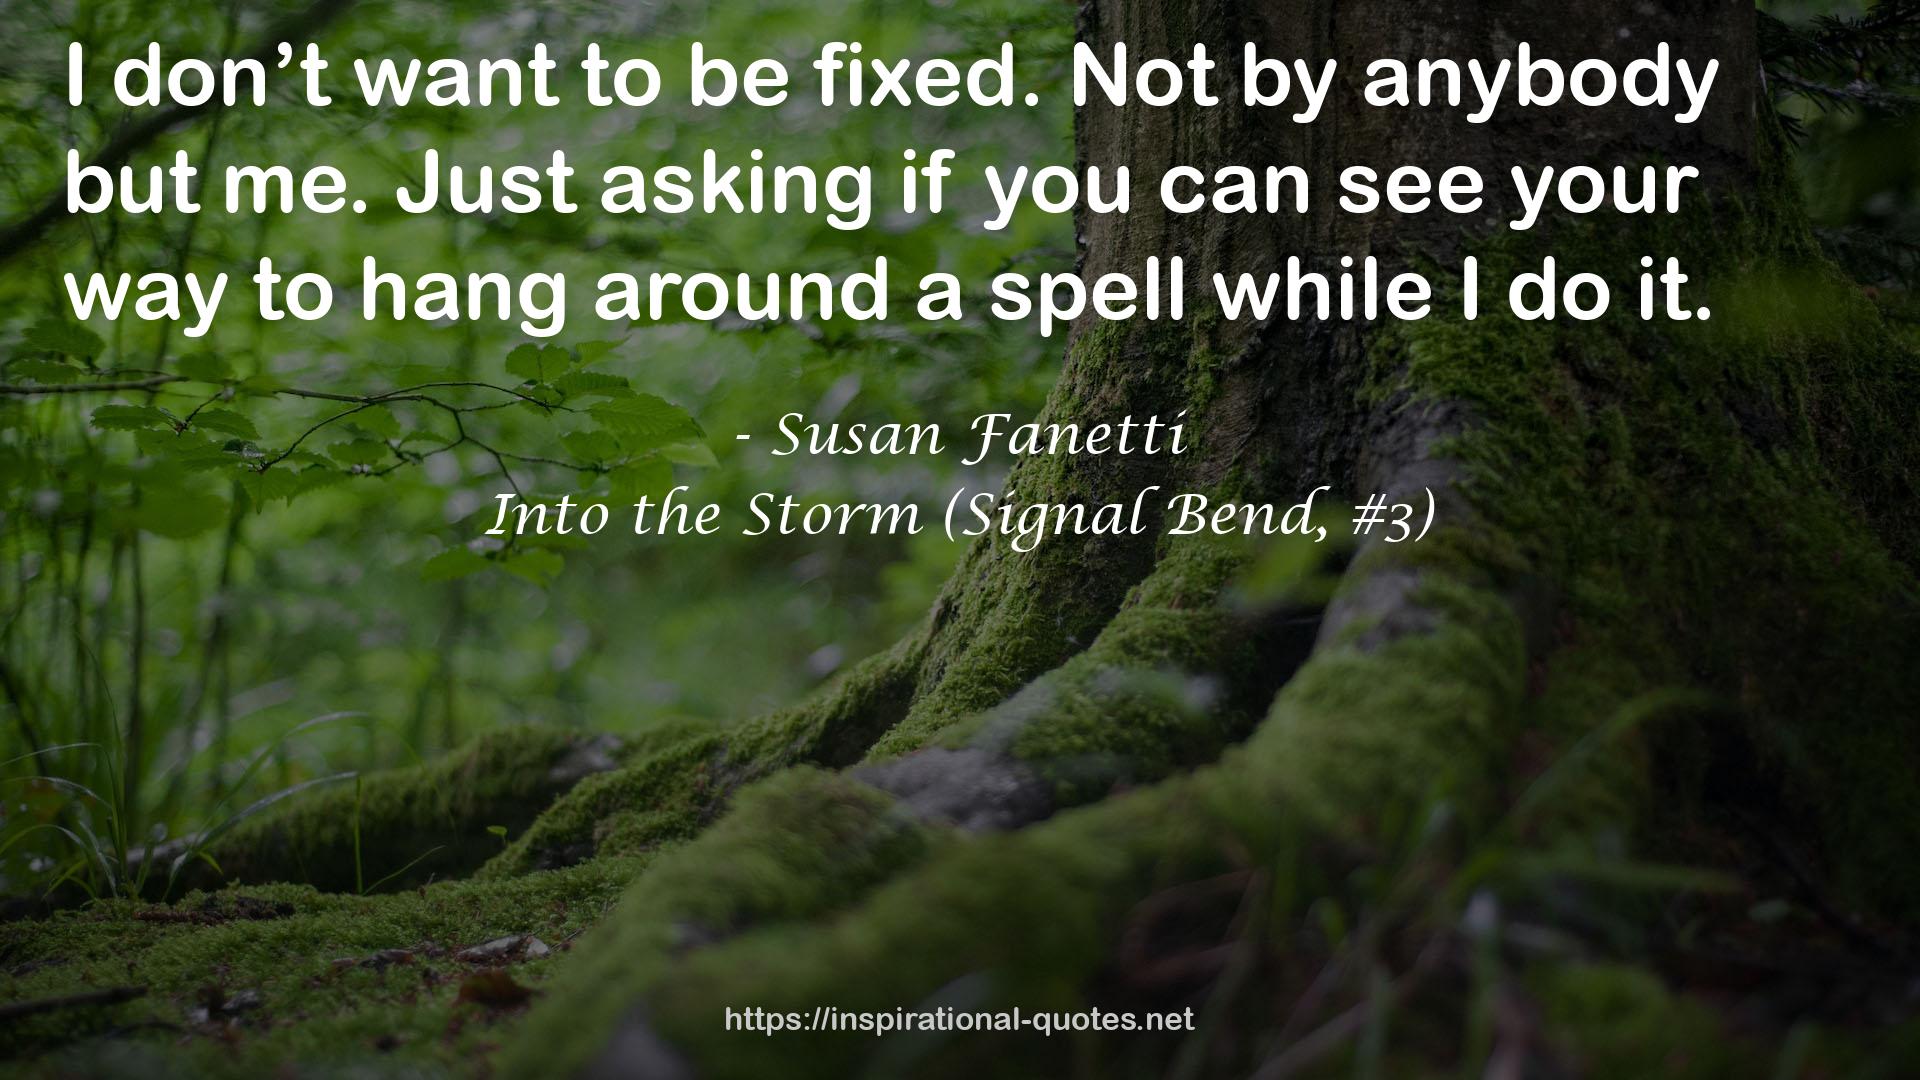 Into the Storm (Signal Bend, #3) QUOTES